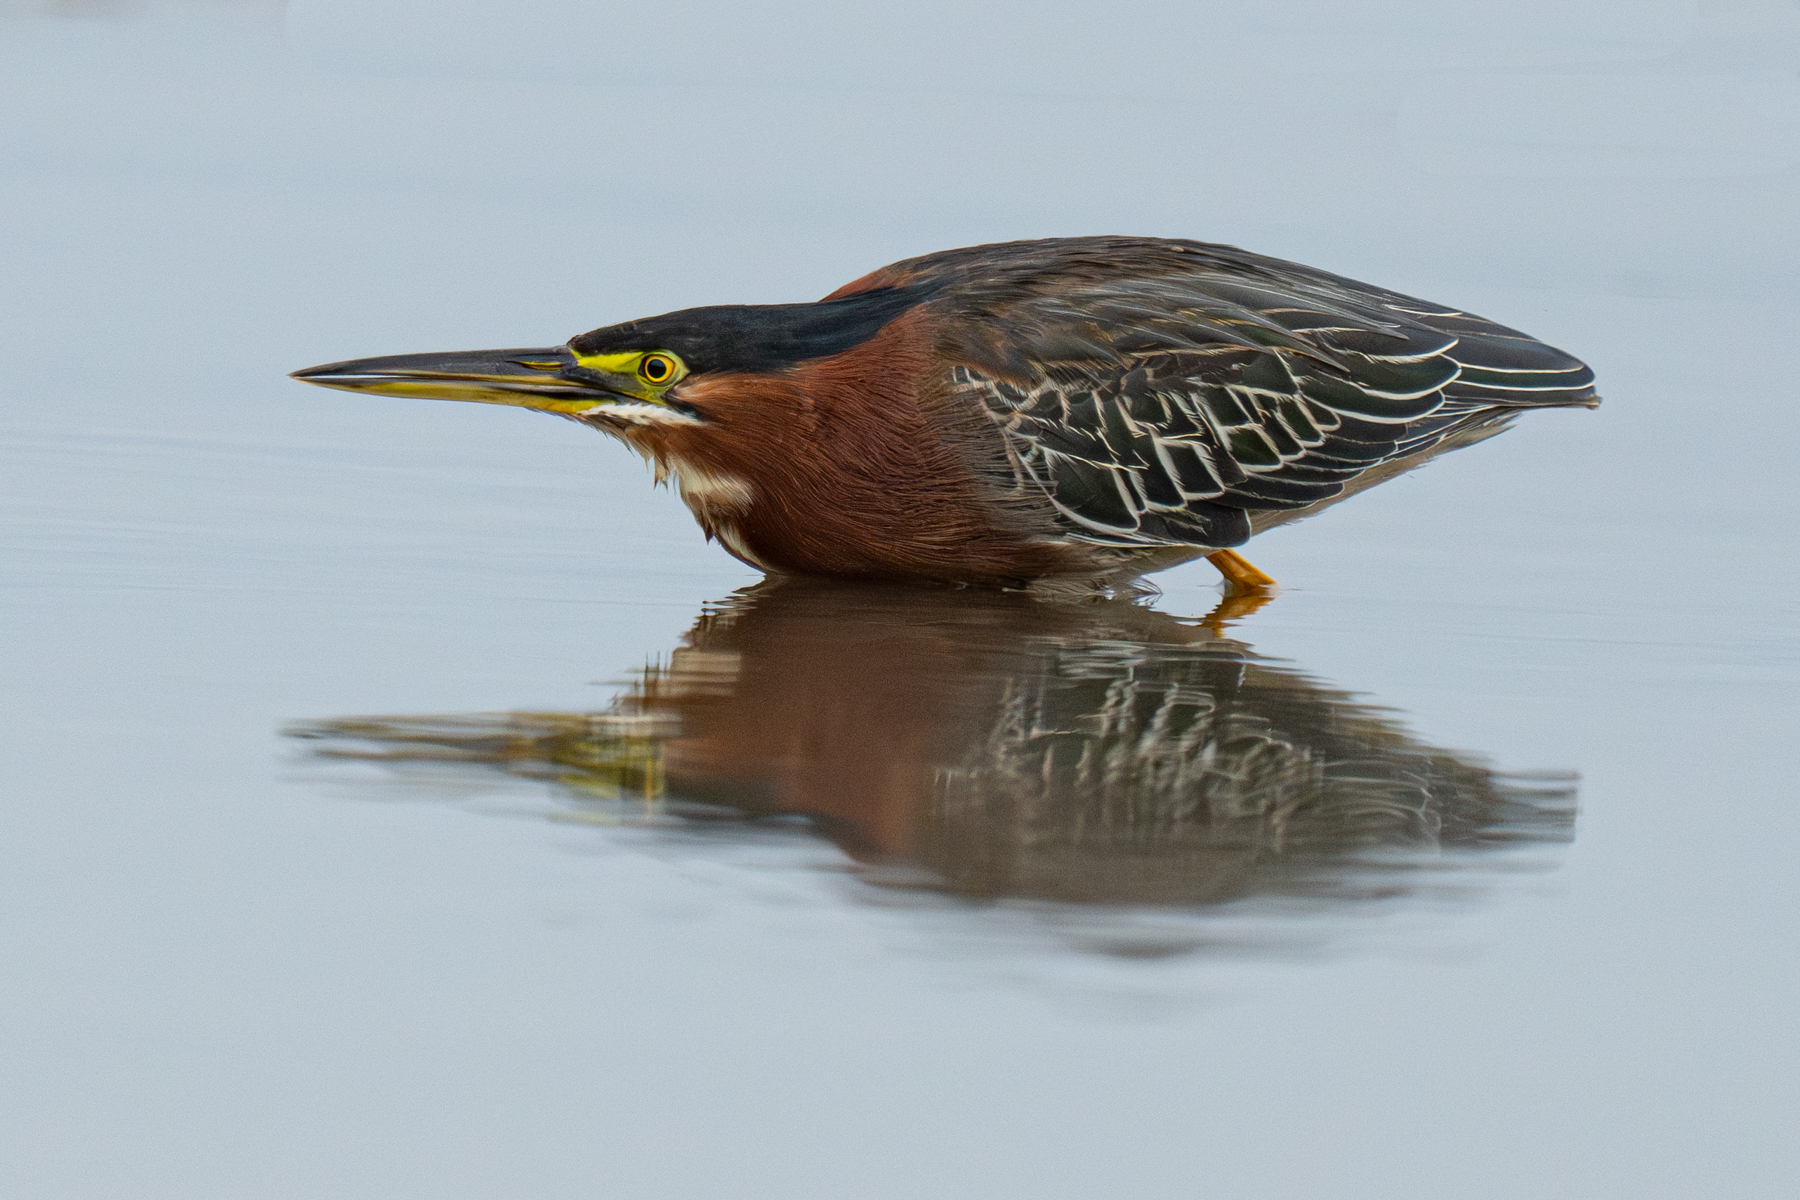 Green Heron hunting with reflection (image by Inger Vandyke)